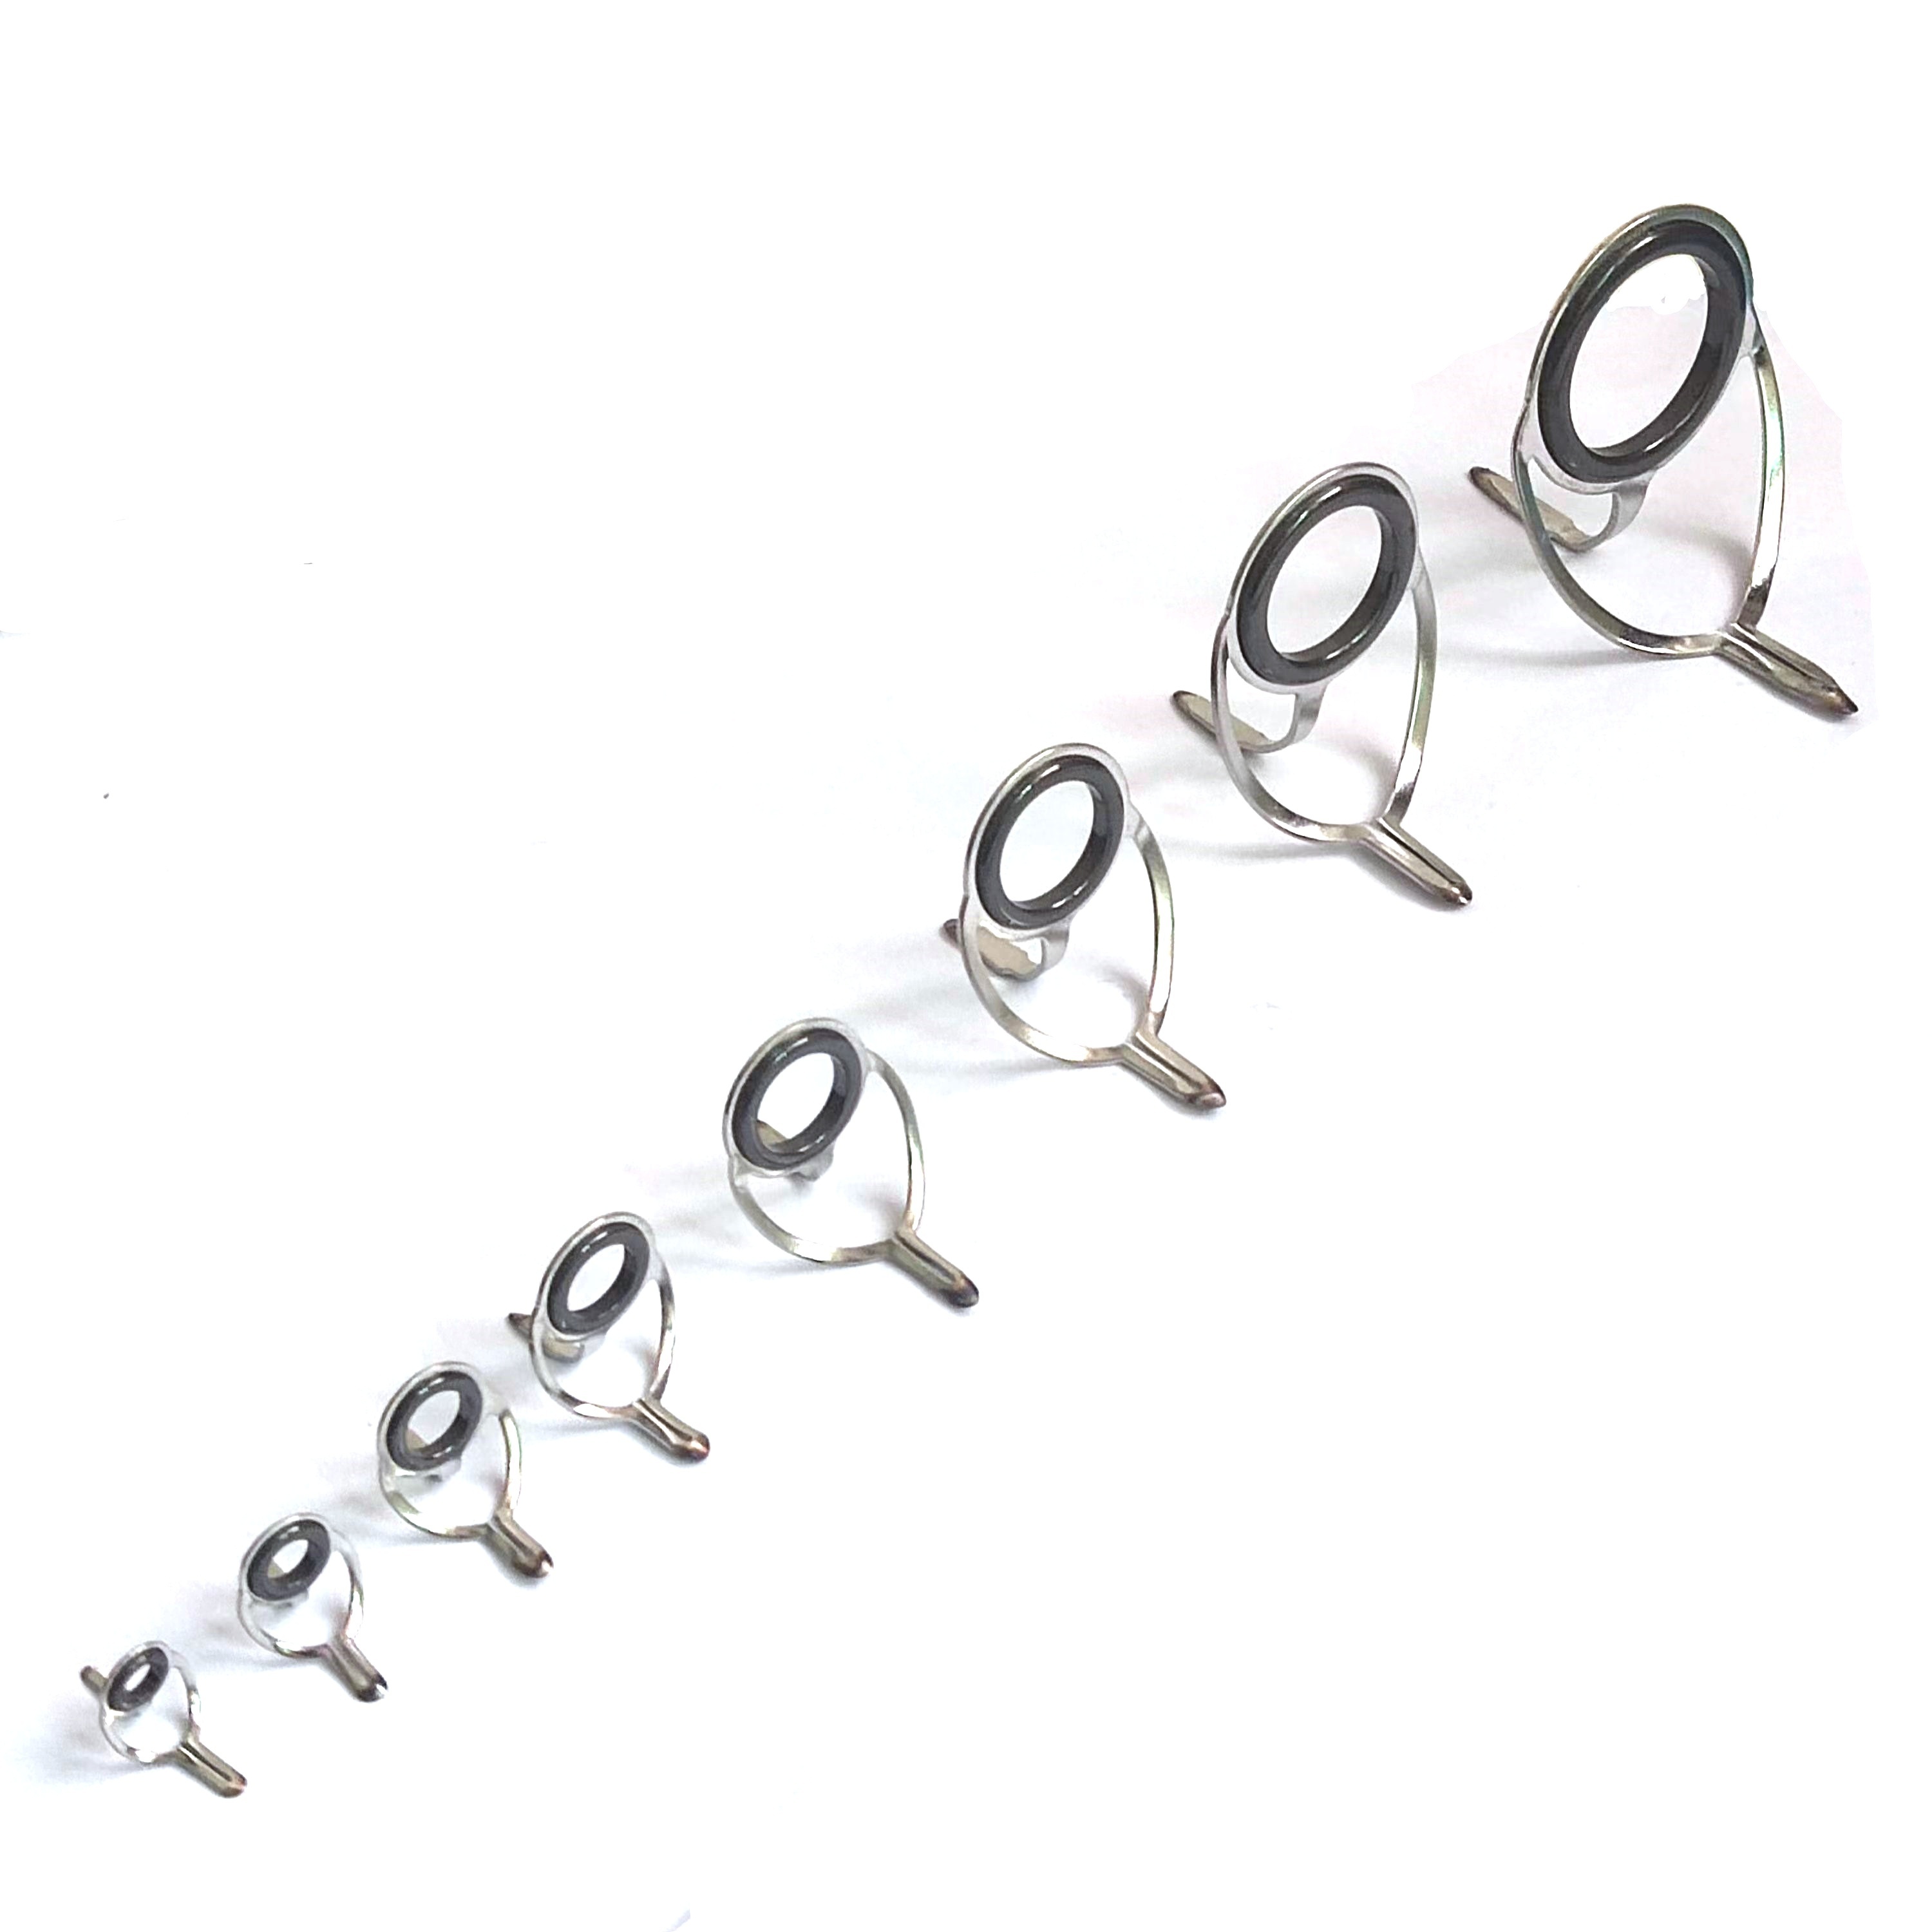 8pcs Durable Fishing Guide Rings with Ceramic and Stainless Steel Tips -  Repair Kit for Sea Fishing Rods - Includes One Model for Each Size - *